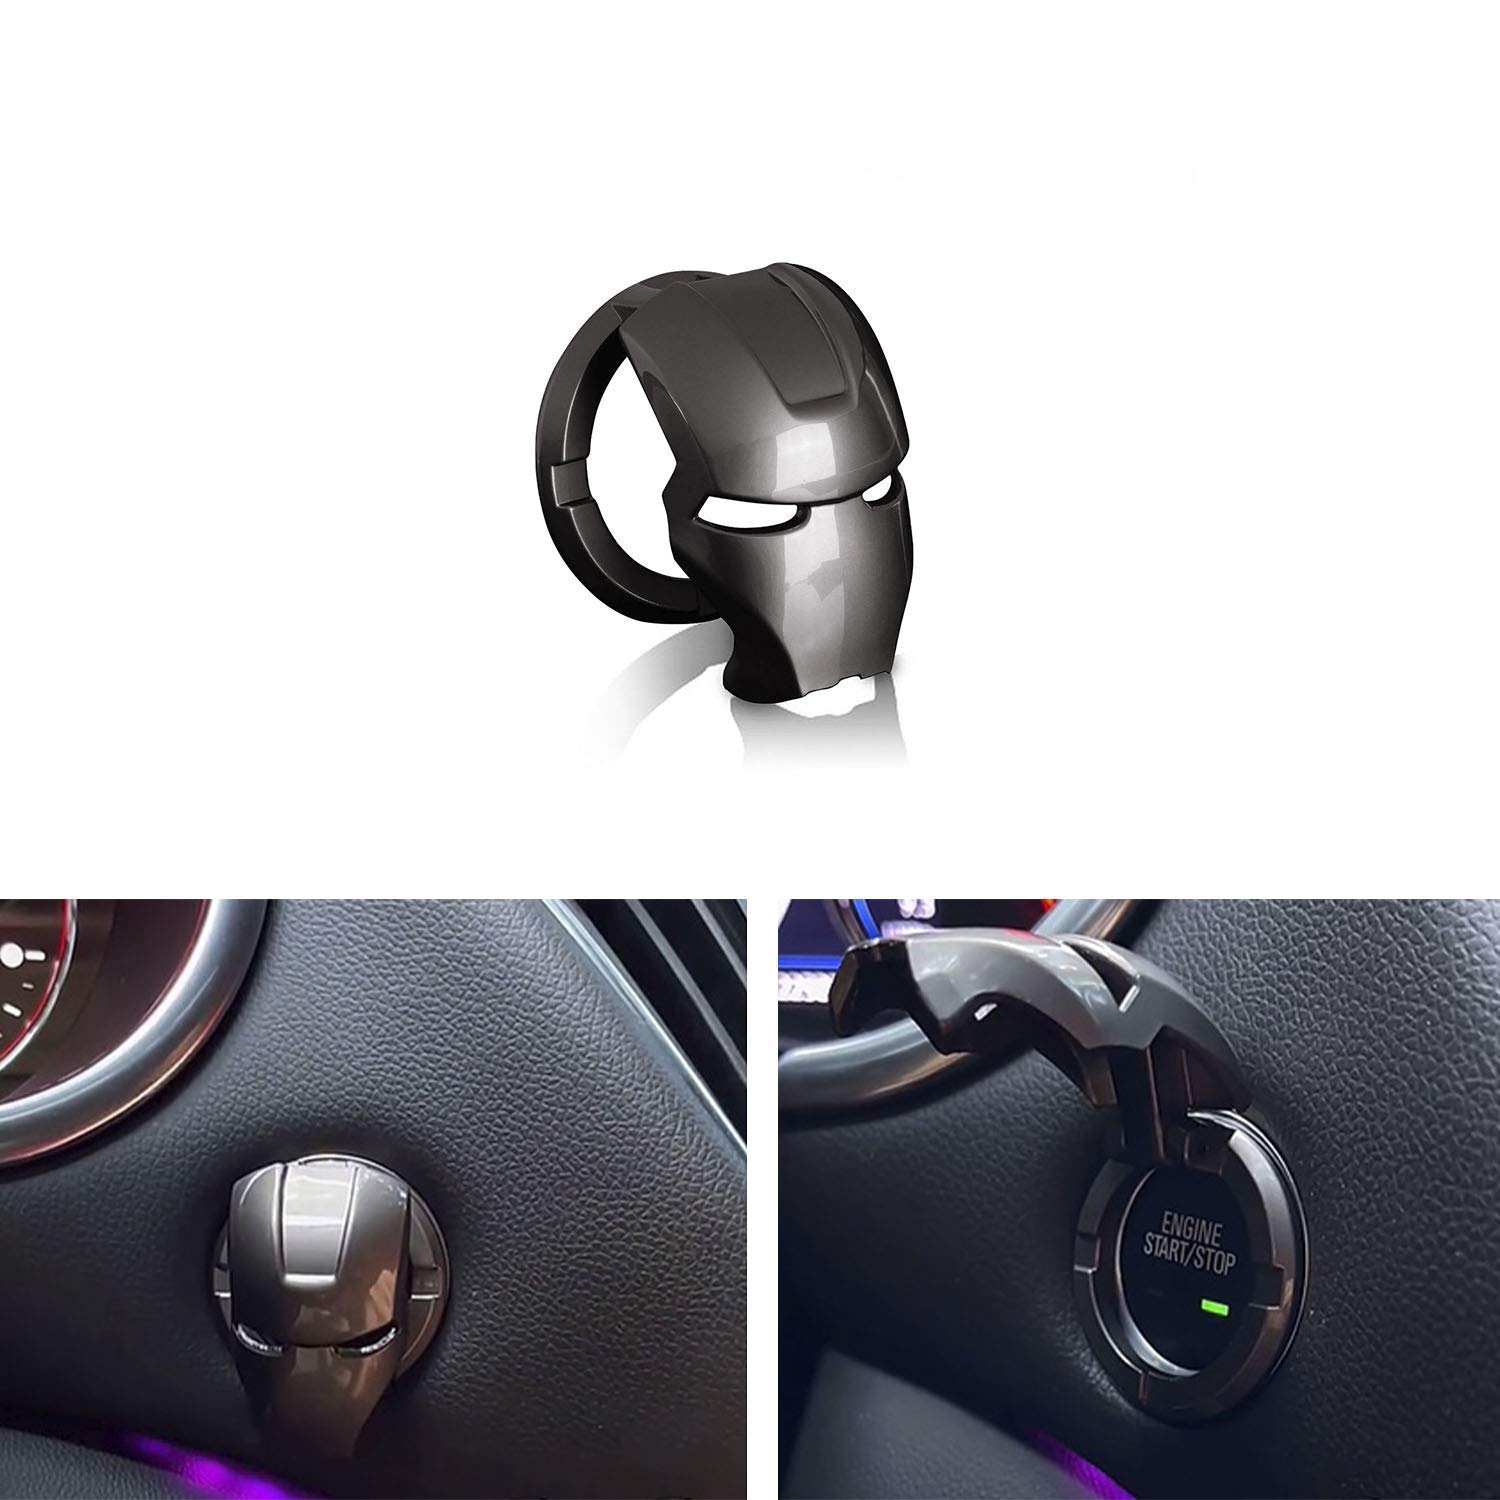 2021 New Car Engine Start Stop Button Cover Push Start Button Cover Anti-Scratch Car Engine Decoration Cover Black